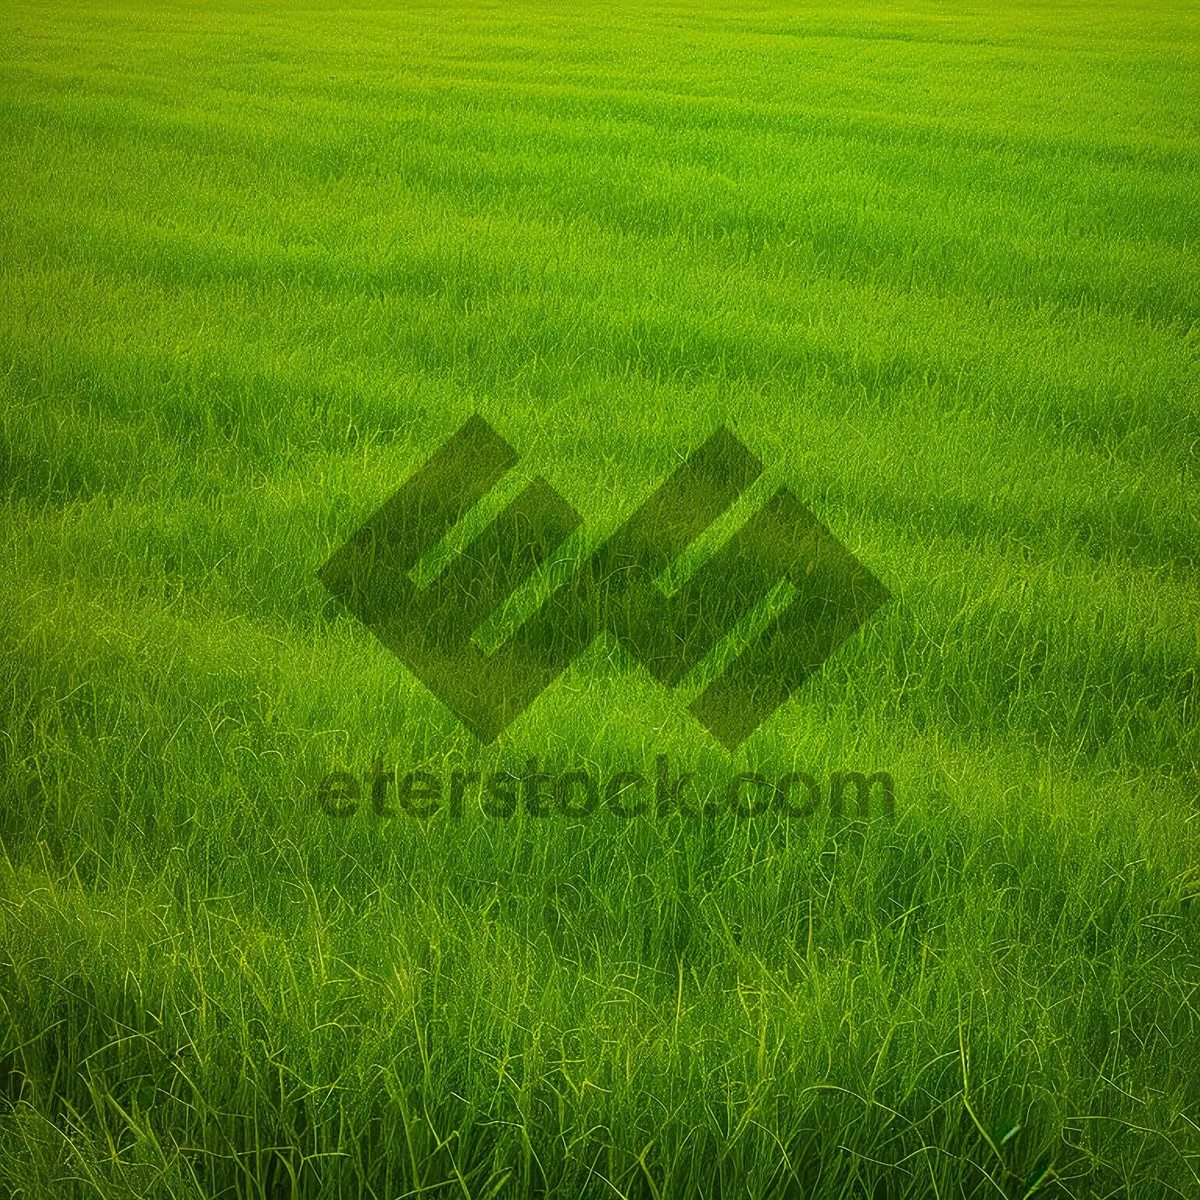 Picture of Vibrant Wheat Field in Summer